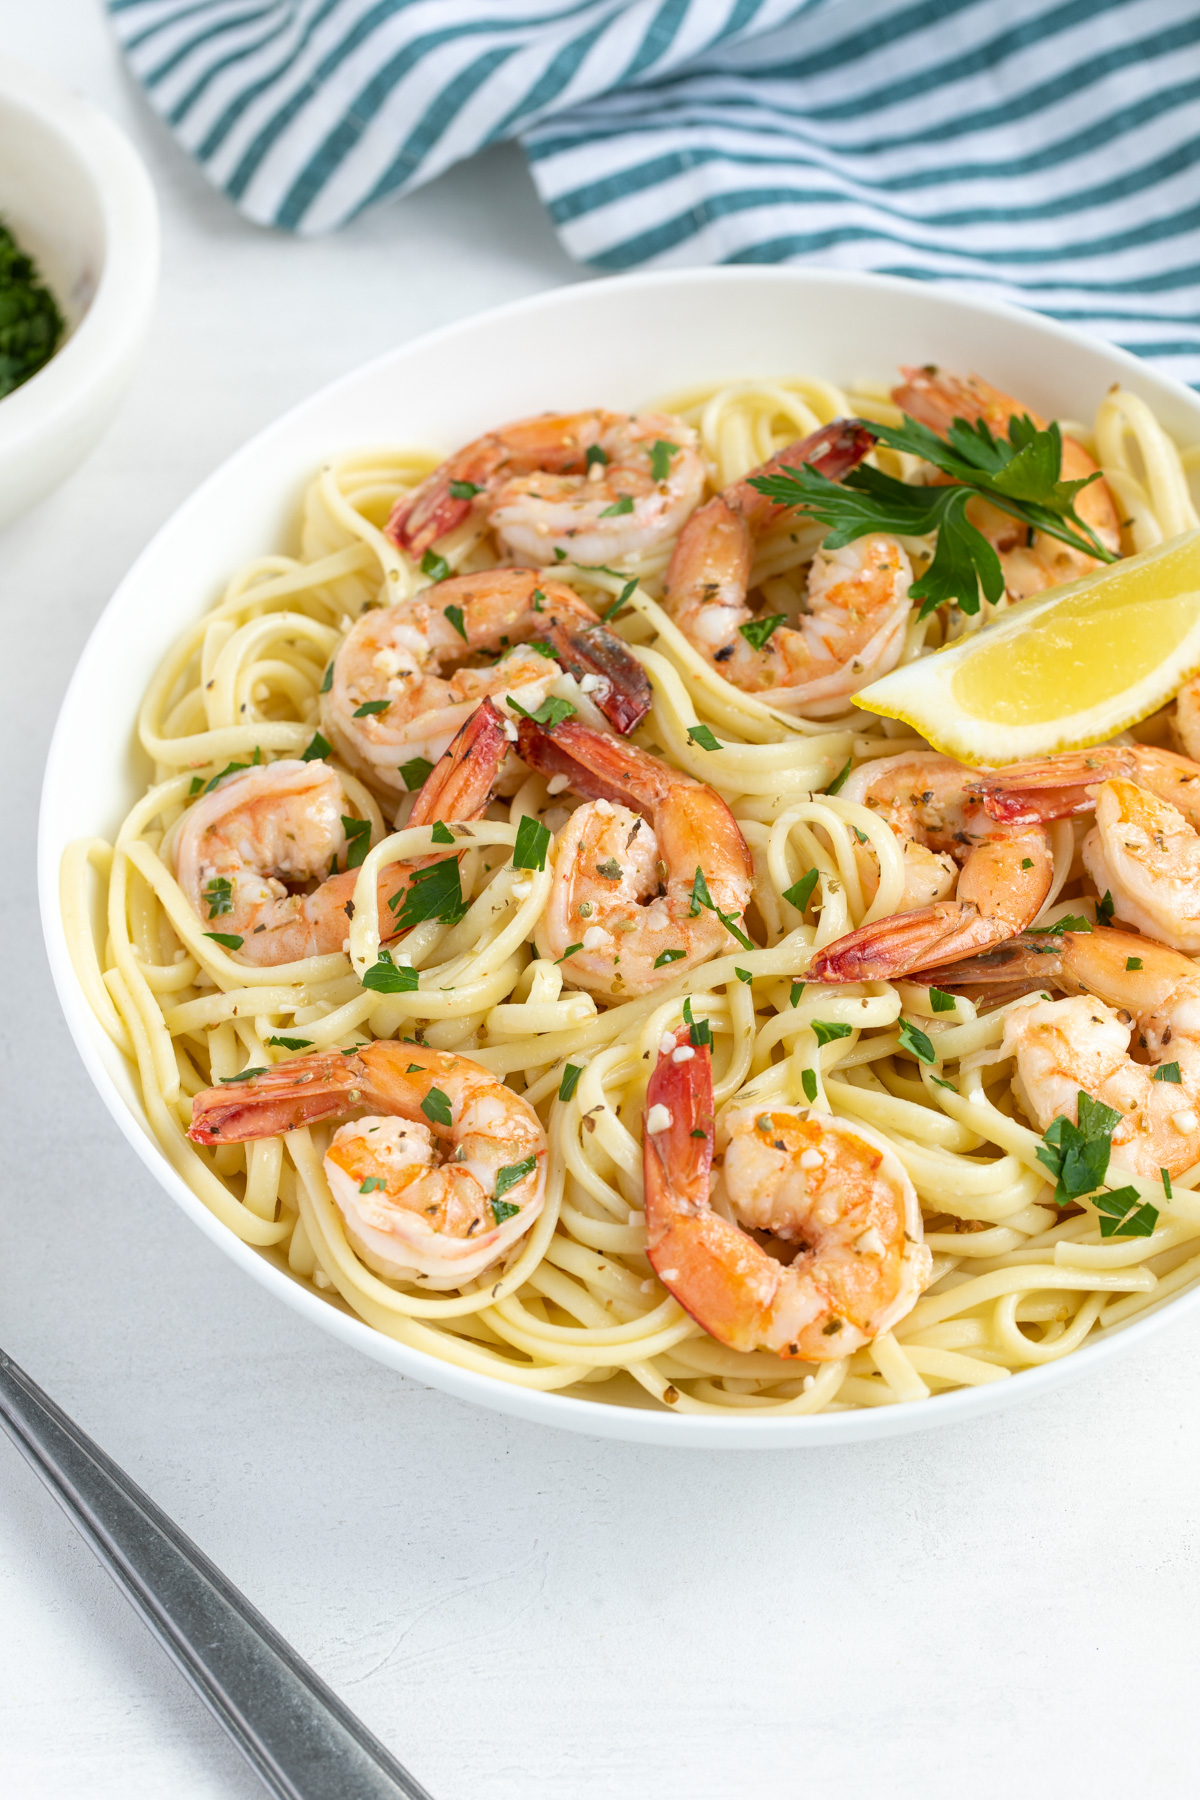 Easy shrimp scampi with pasta in a white bowl garnished with parsley and lemon.